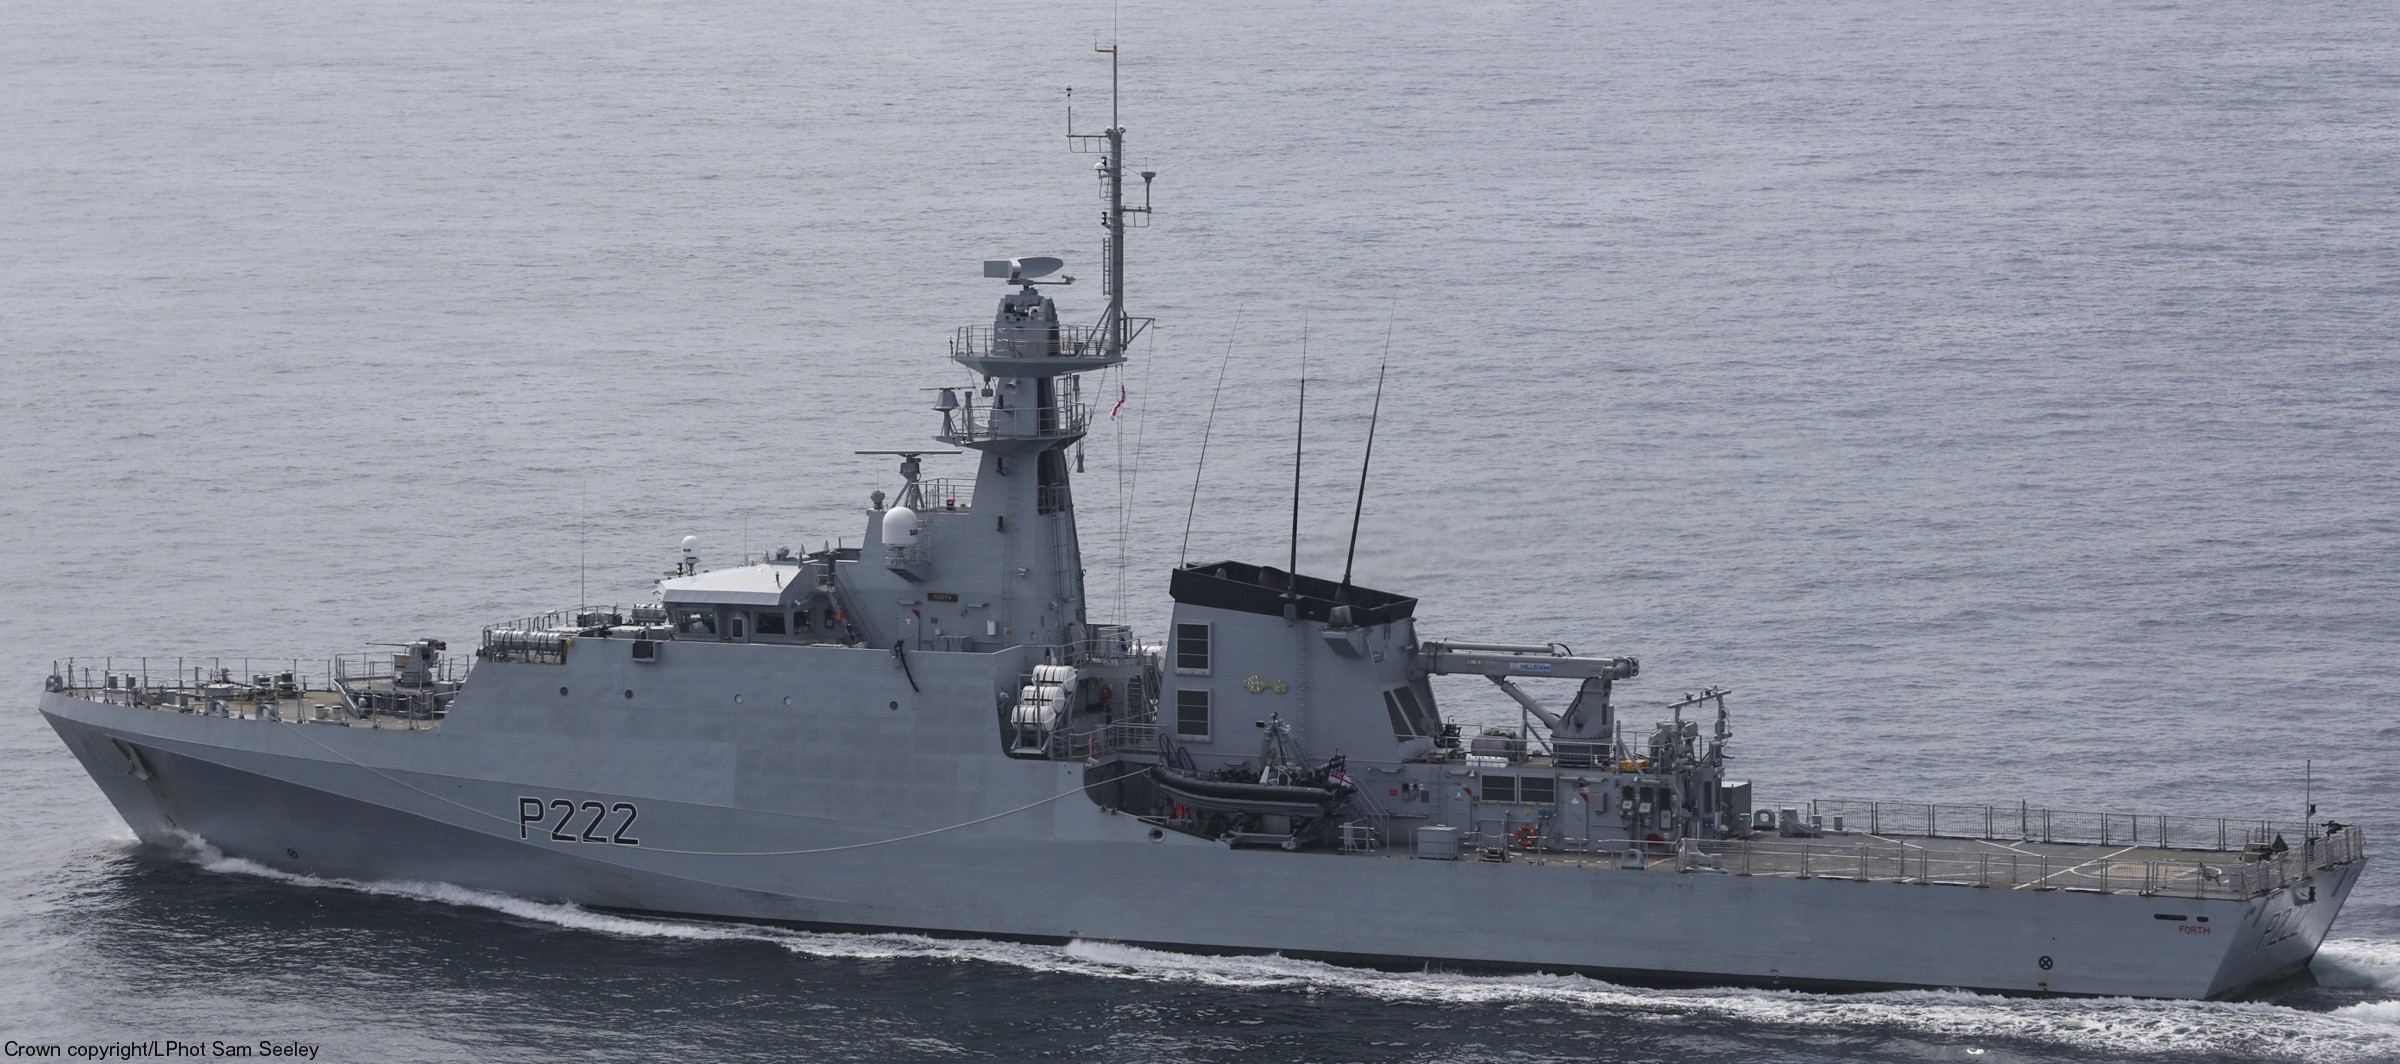 p222 hms forth river class offshore patrol vessel opv royal navy 54